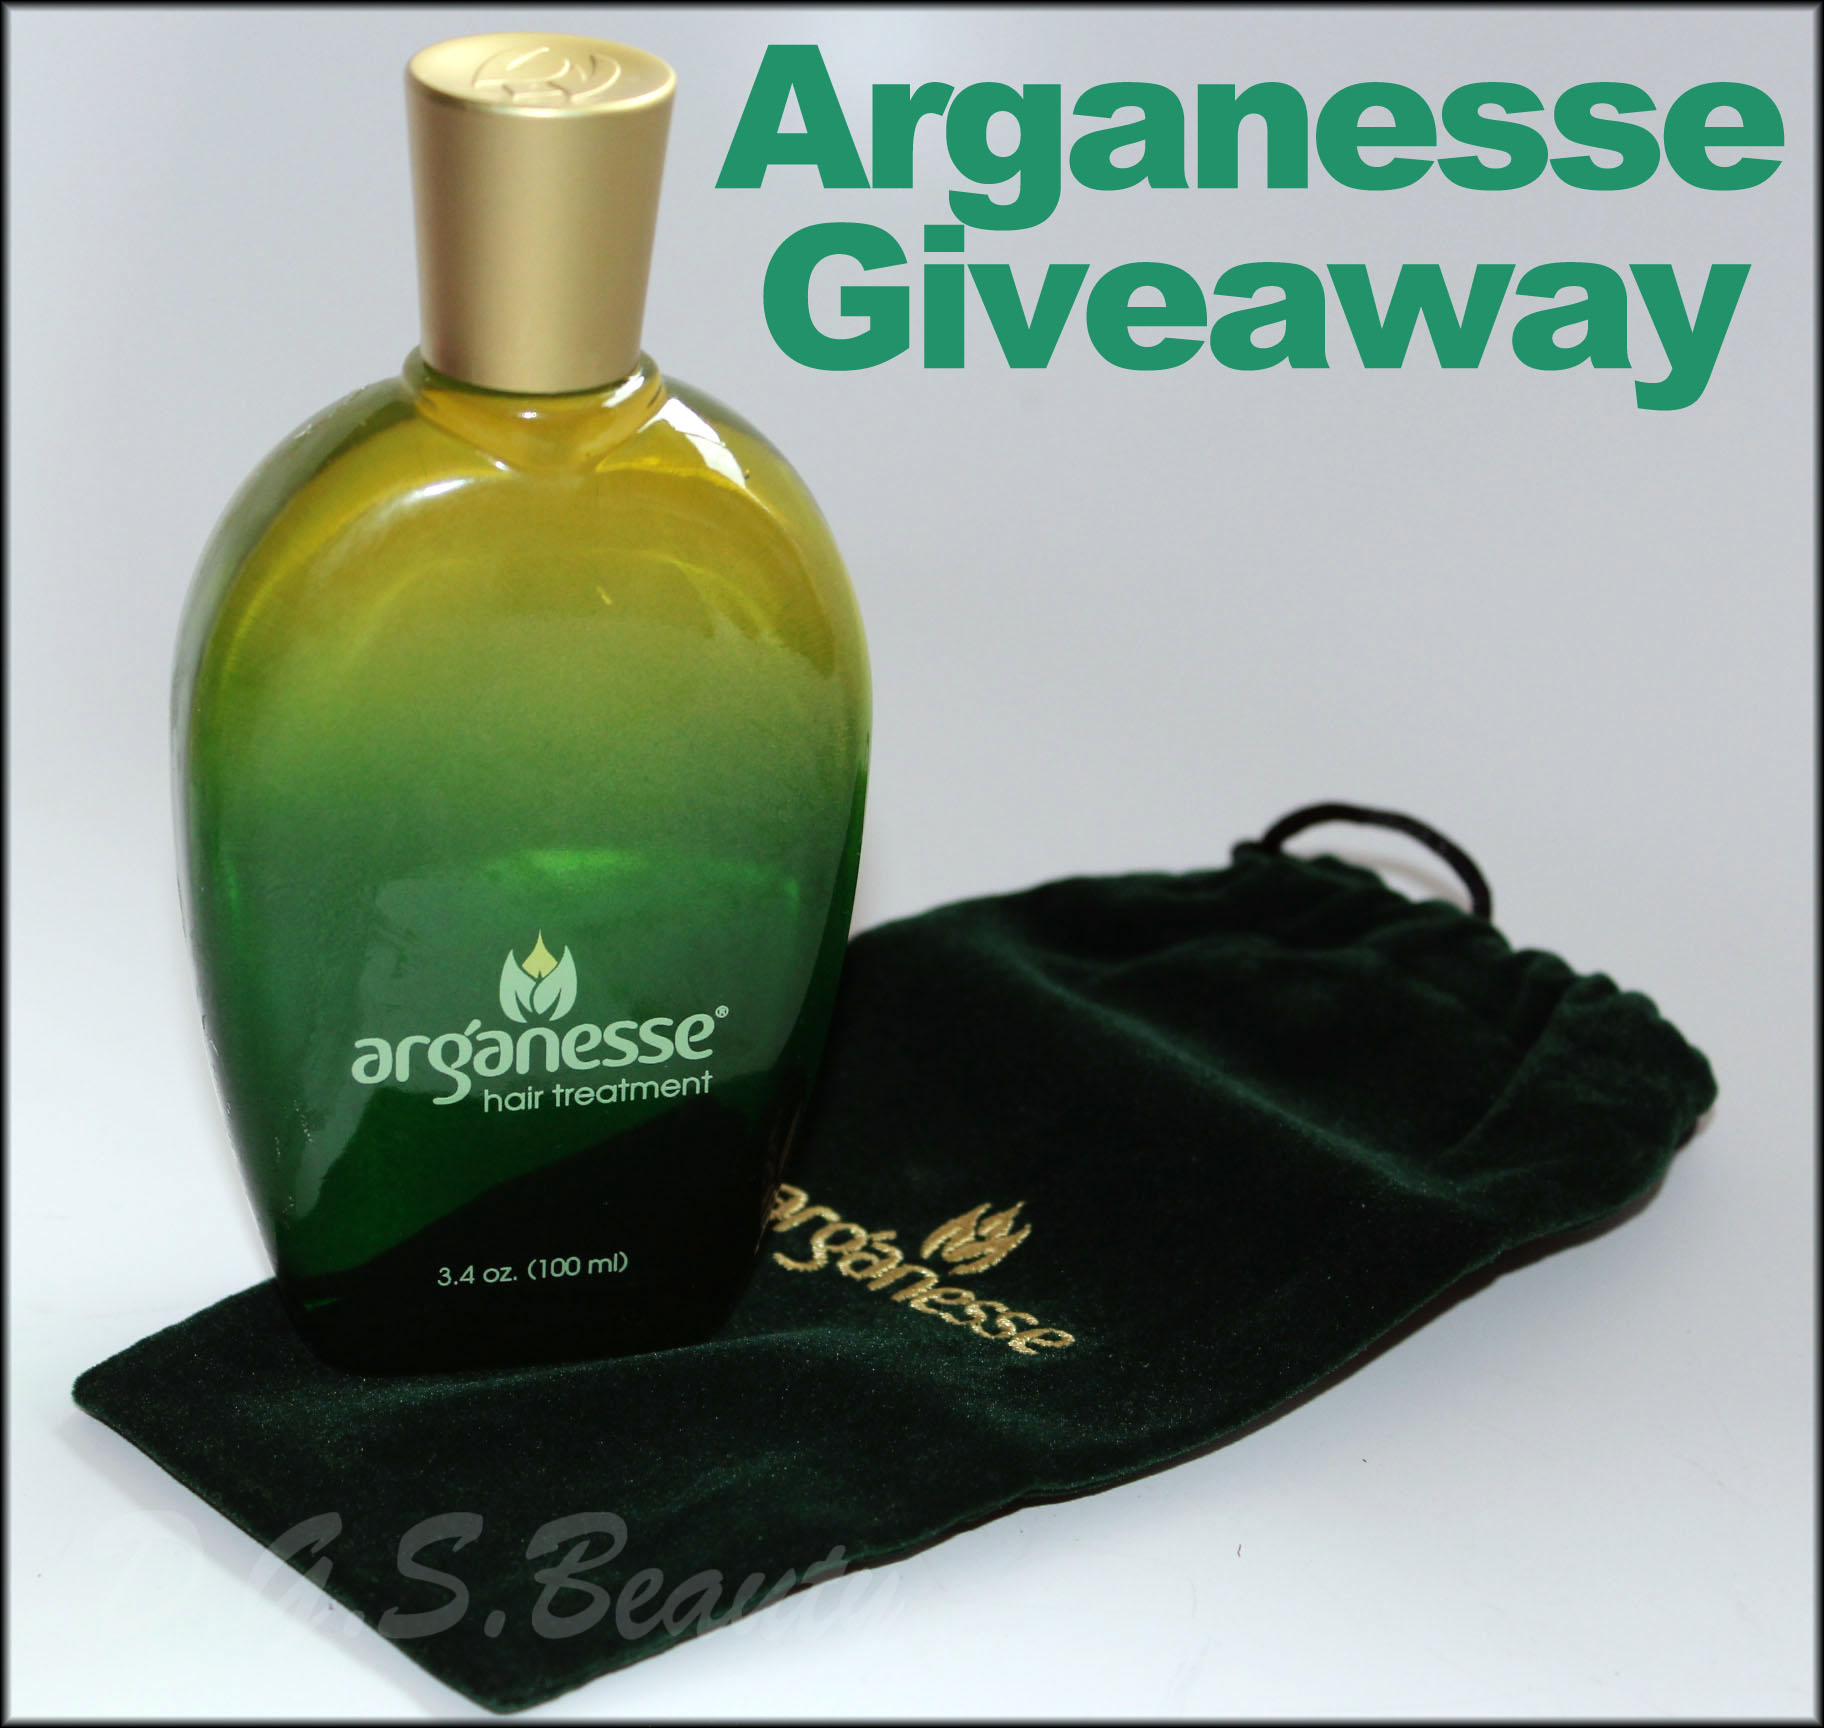 Arganesse Hair Treatment Giveaway ($120 Value)